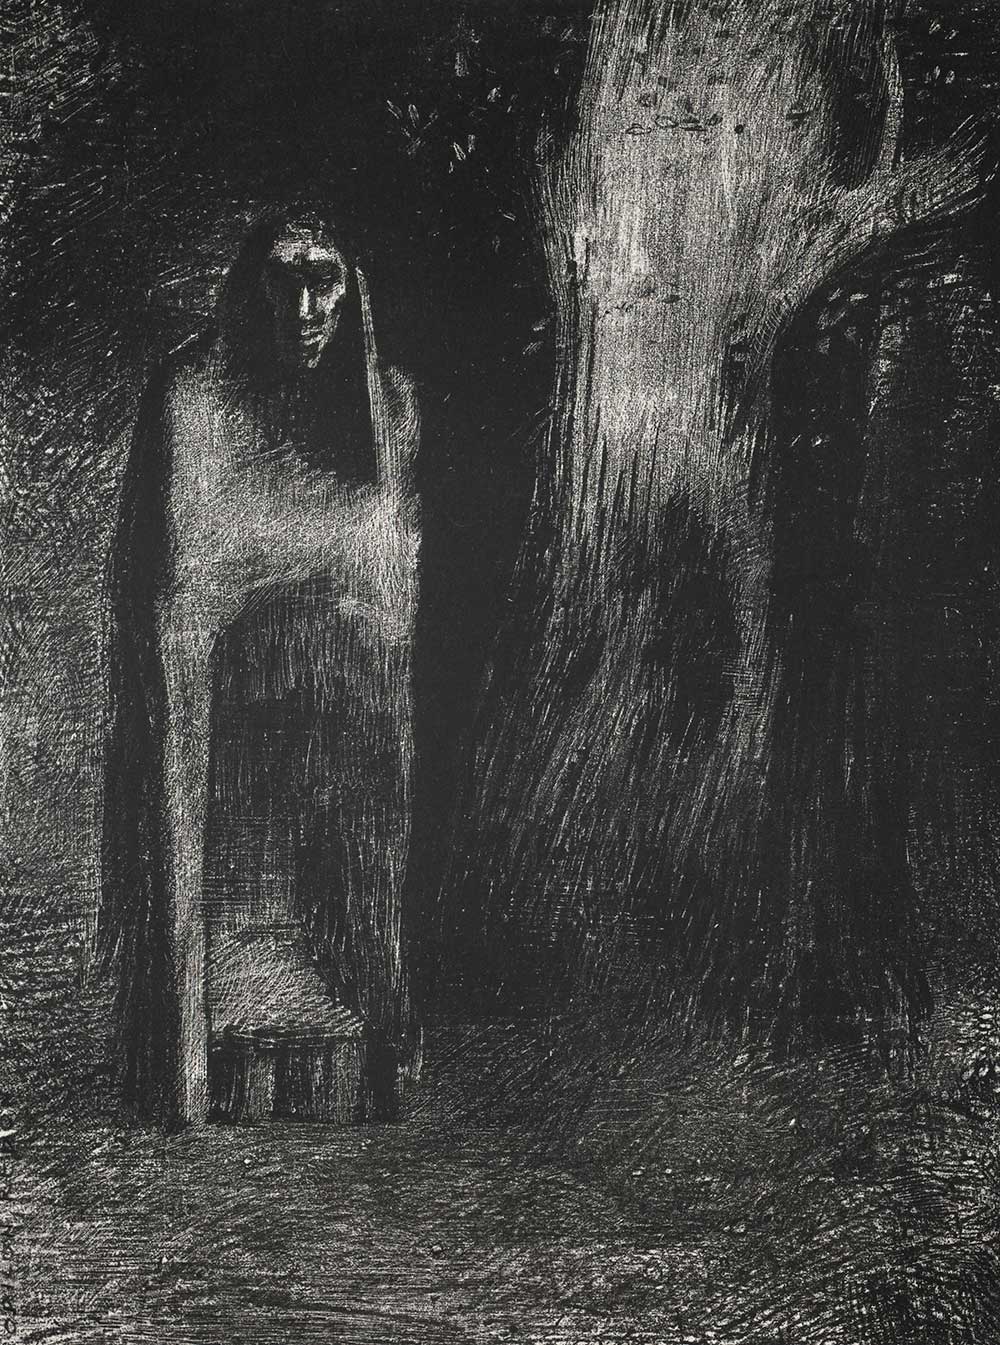 The Man Was Alone in a Night Landscape, by Odilon Redon, nineteenth century.